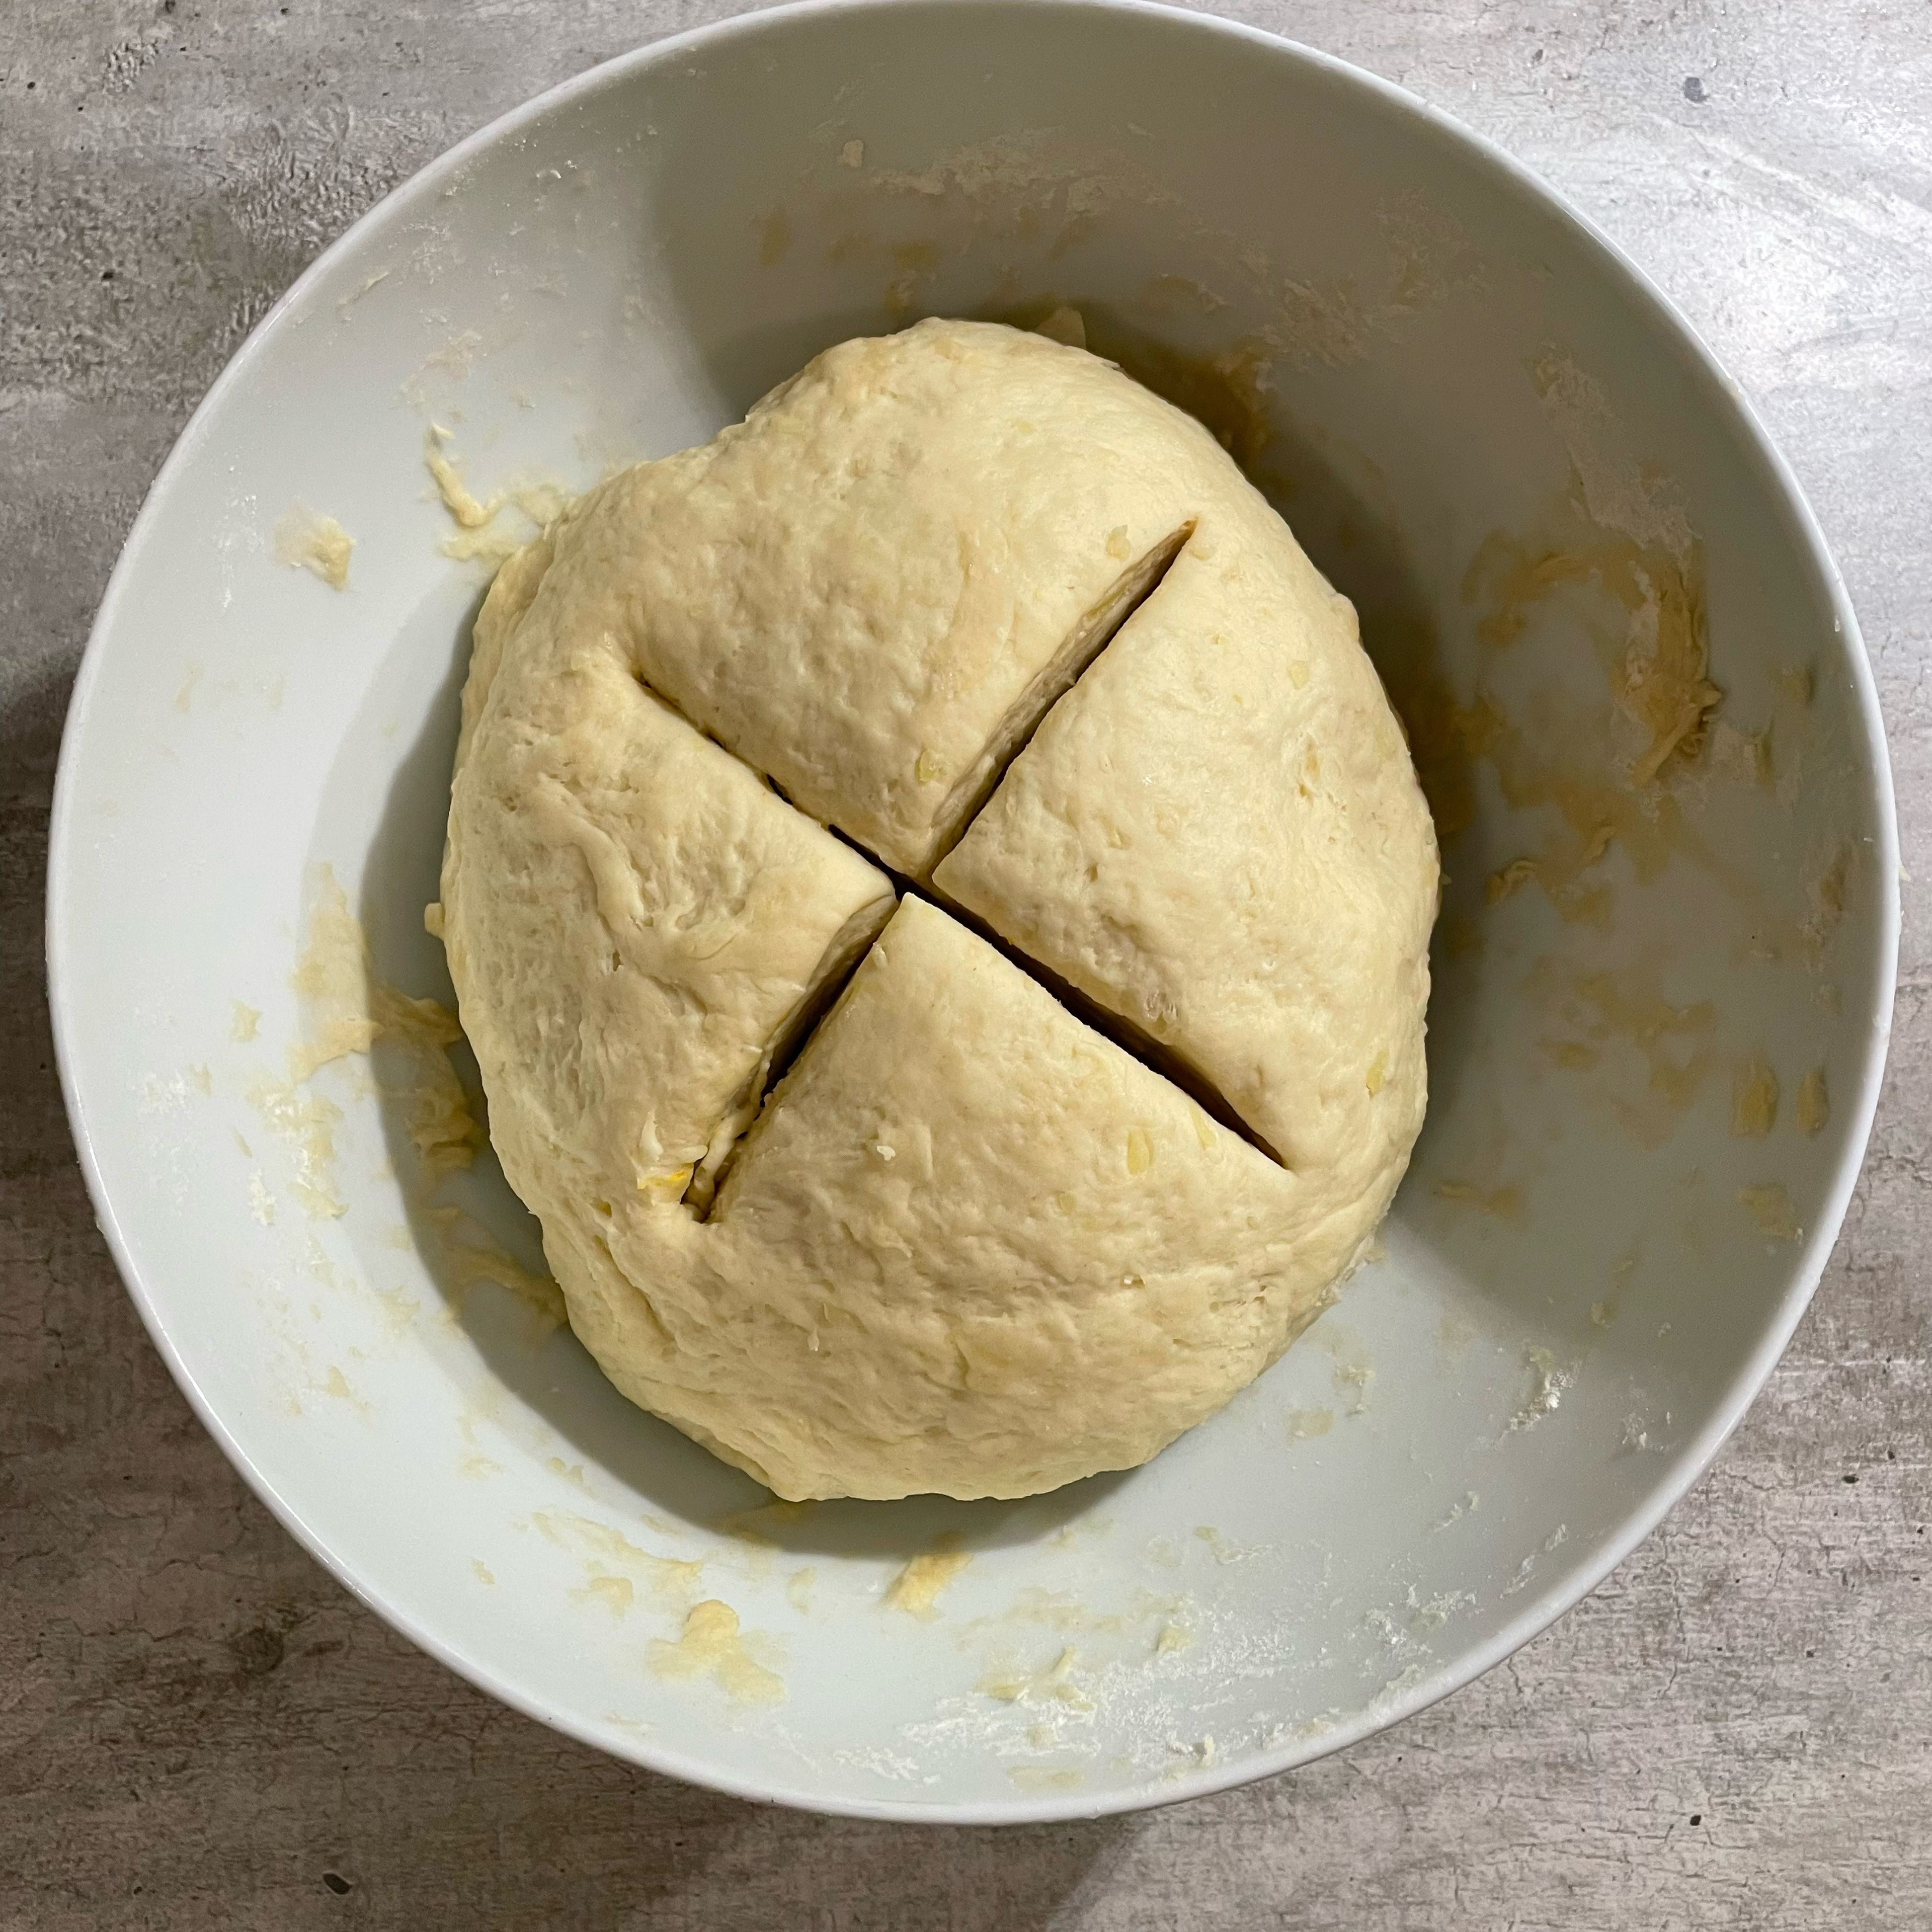 Mix the ingredients and then knead with your hands until obtaining a soft and compact dough. Cover the bowl with a clean cloth and let the dough rest for at least 4 hours (ideally overnight). You can store it in a dry place (for example your turned off oven).